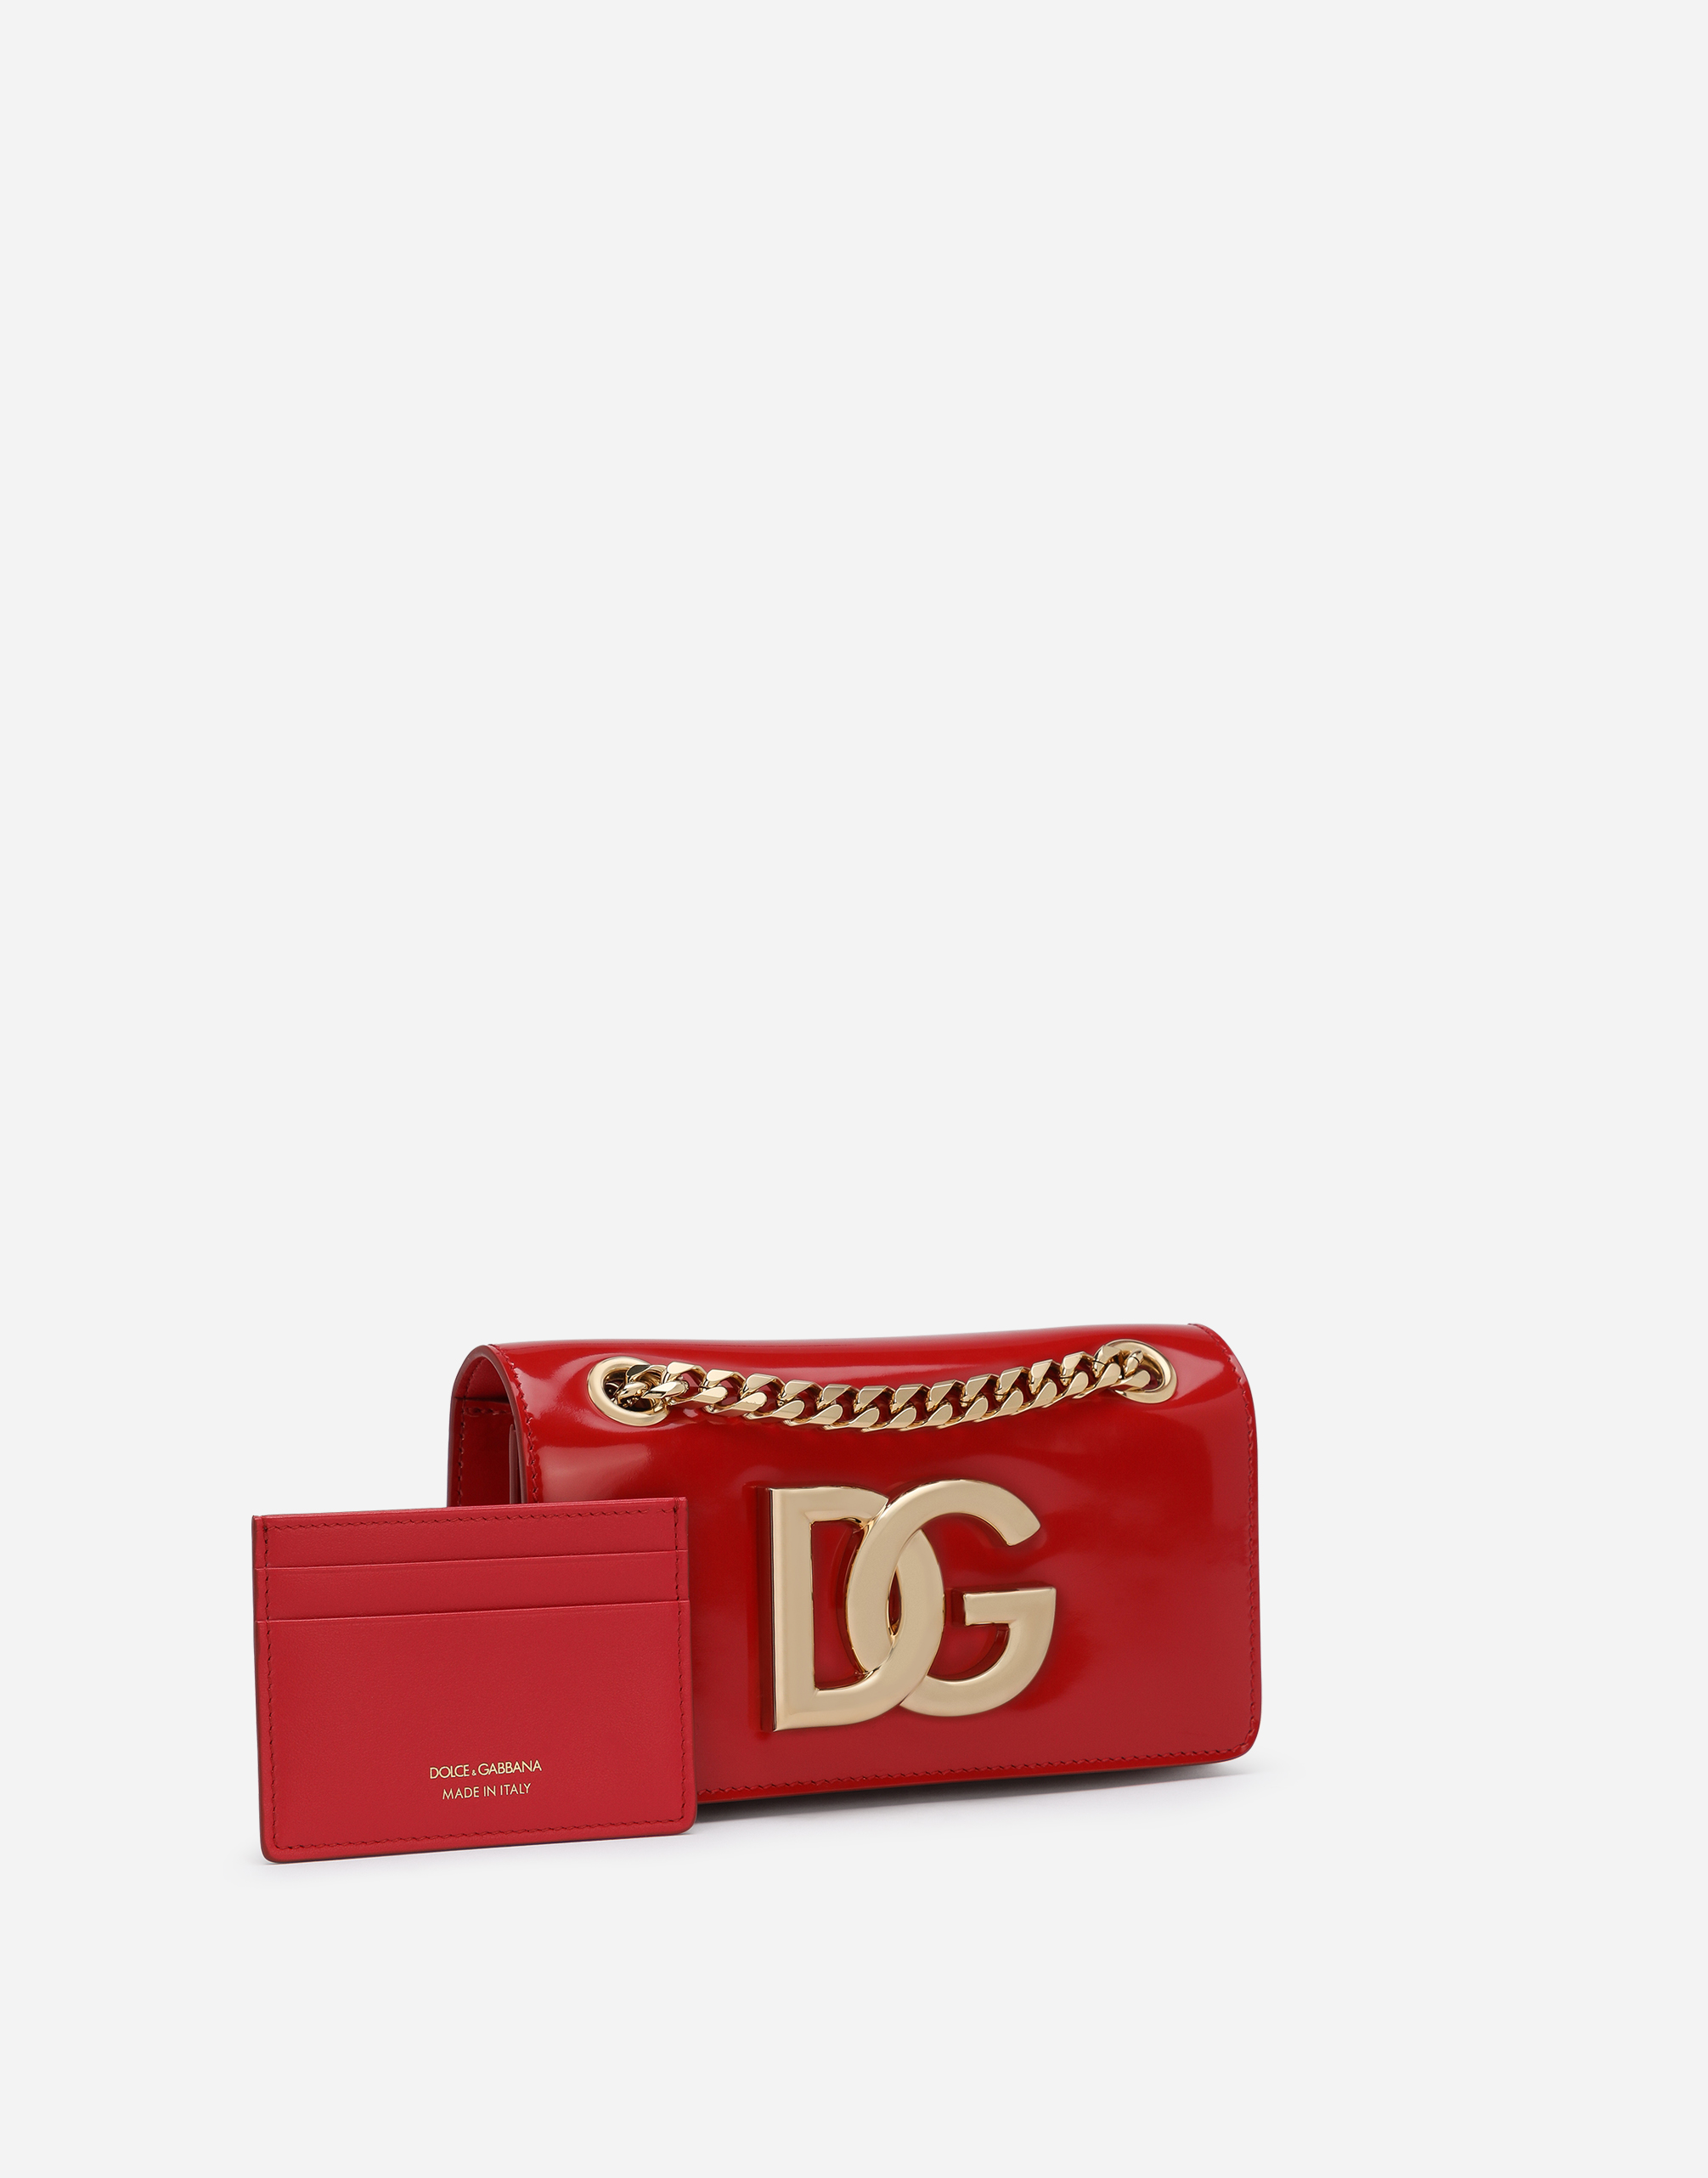 Shop Dolce & Gabbana Polished Calfskin 3.5 Cell Phone Bag In Red